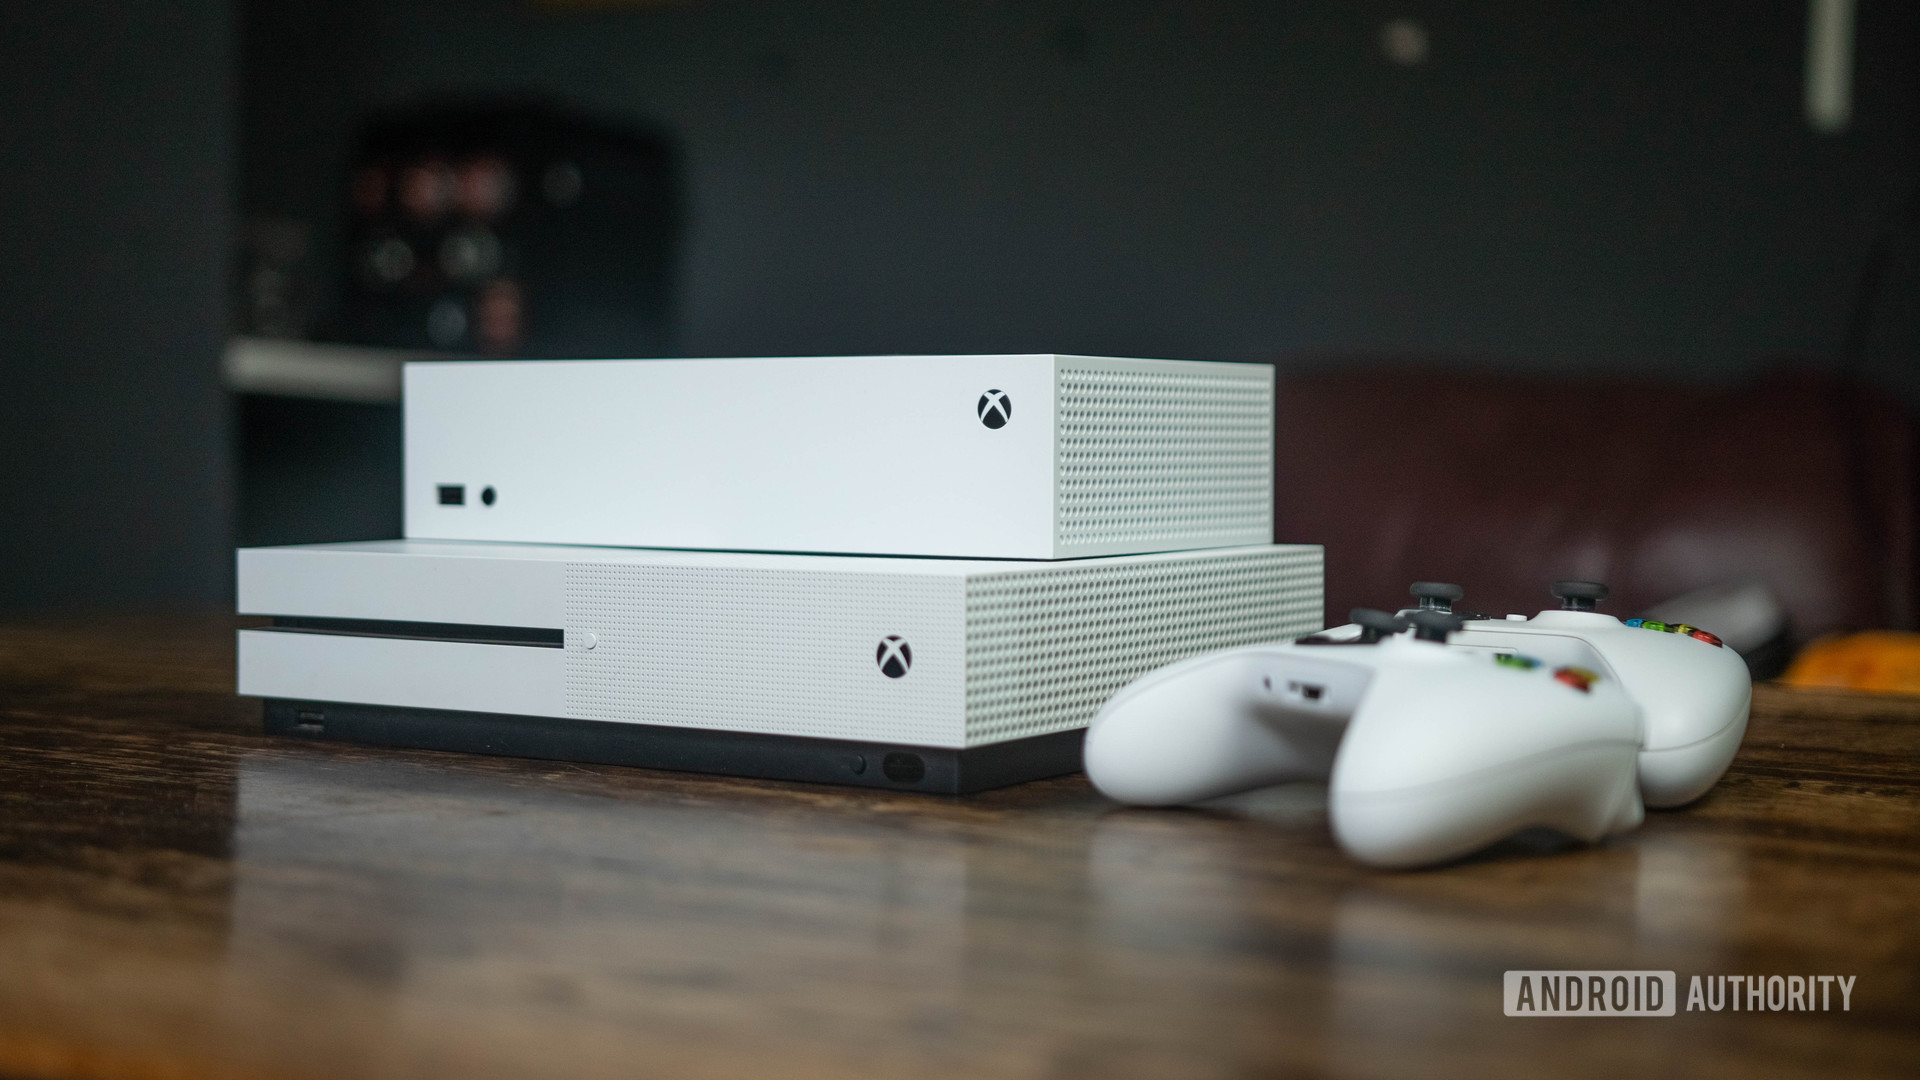 The cheaper Xbox Series S will support ray-tracing, 120fps and upscaled 4K